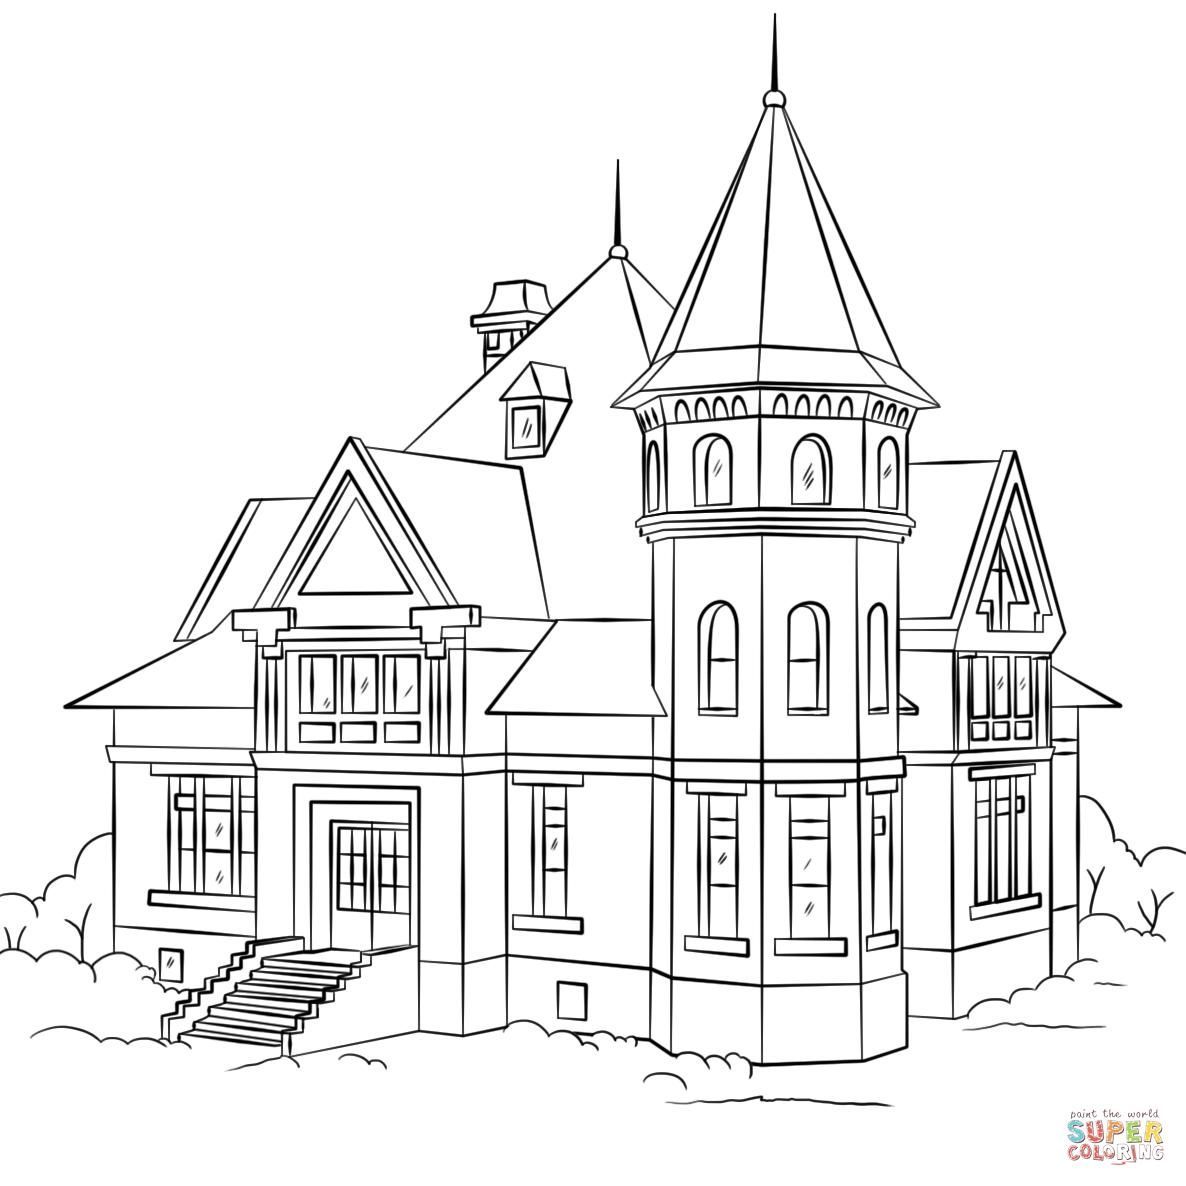 Inside House Coloring Pages at GetColorings.com | Free printable